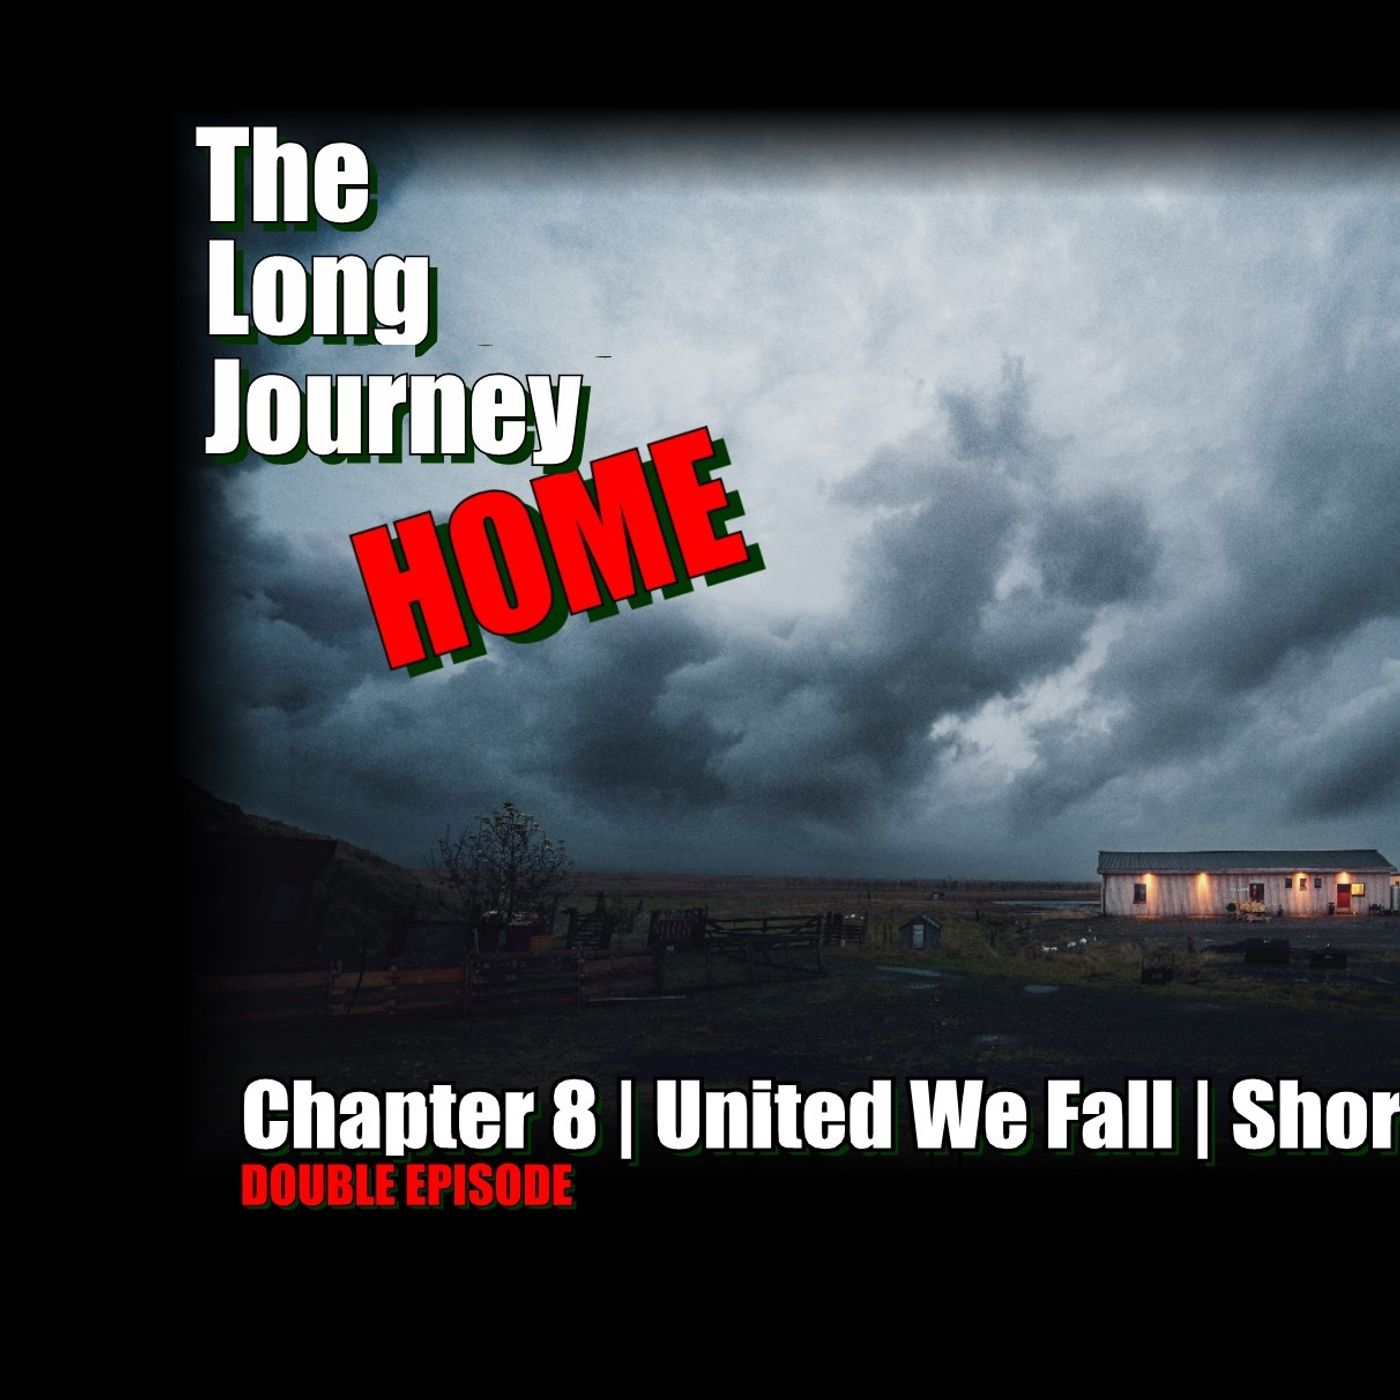 United We Fall - Chapter 8 - The Long Journey Home